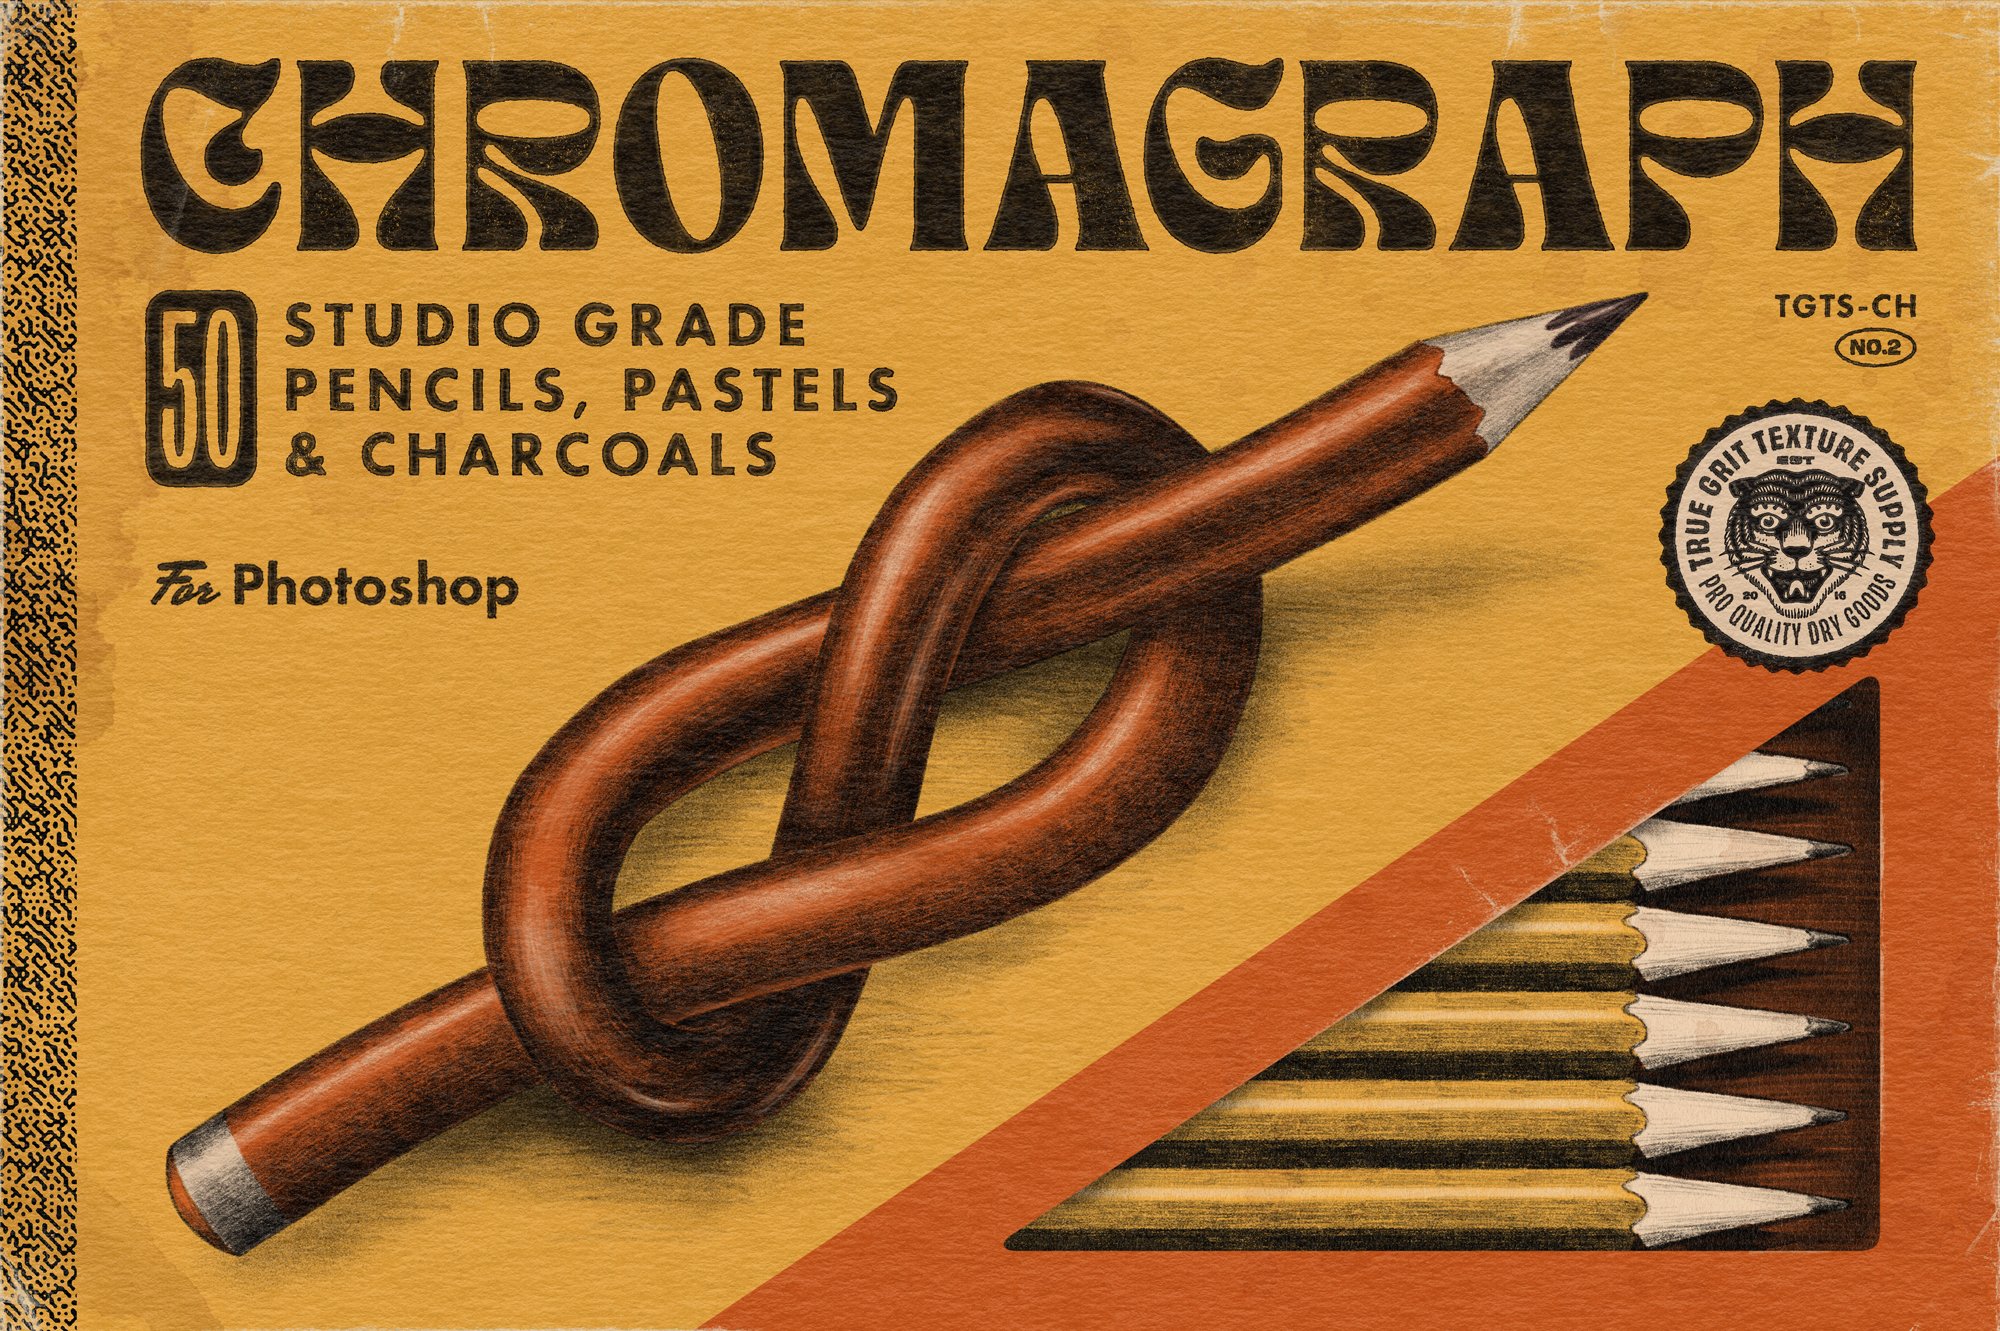 Chromagraph Pencils for Photoshopcover image.